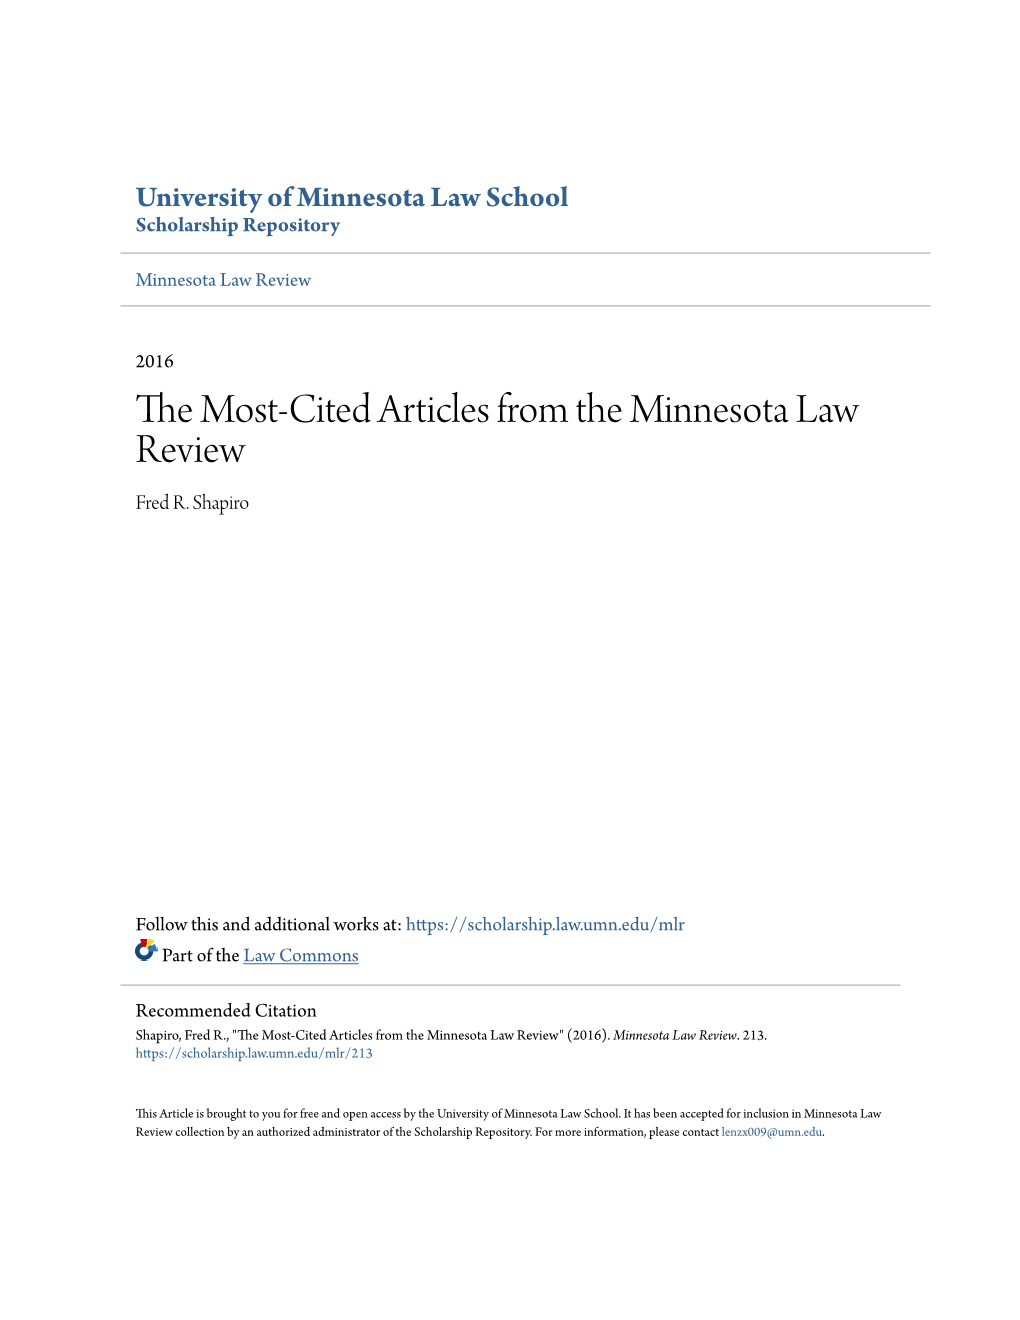 The Most-Cited Articles from the Minnesota Law Review